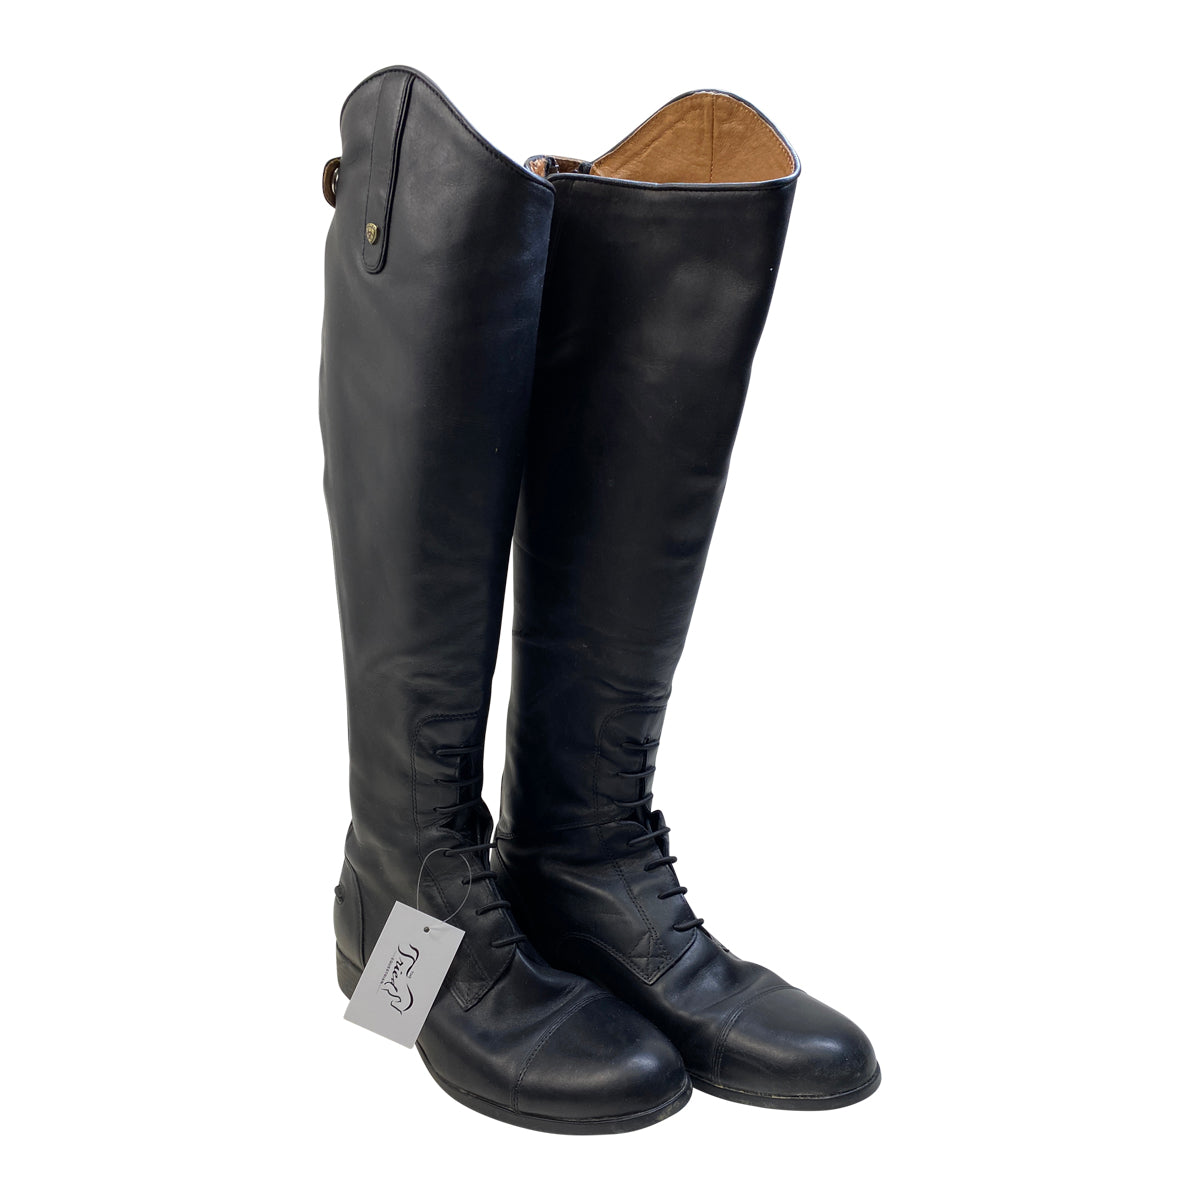 Ariat Heritage Field Boots in Black